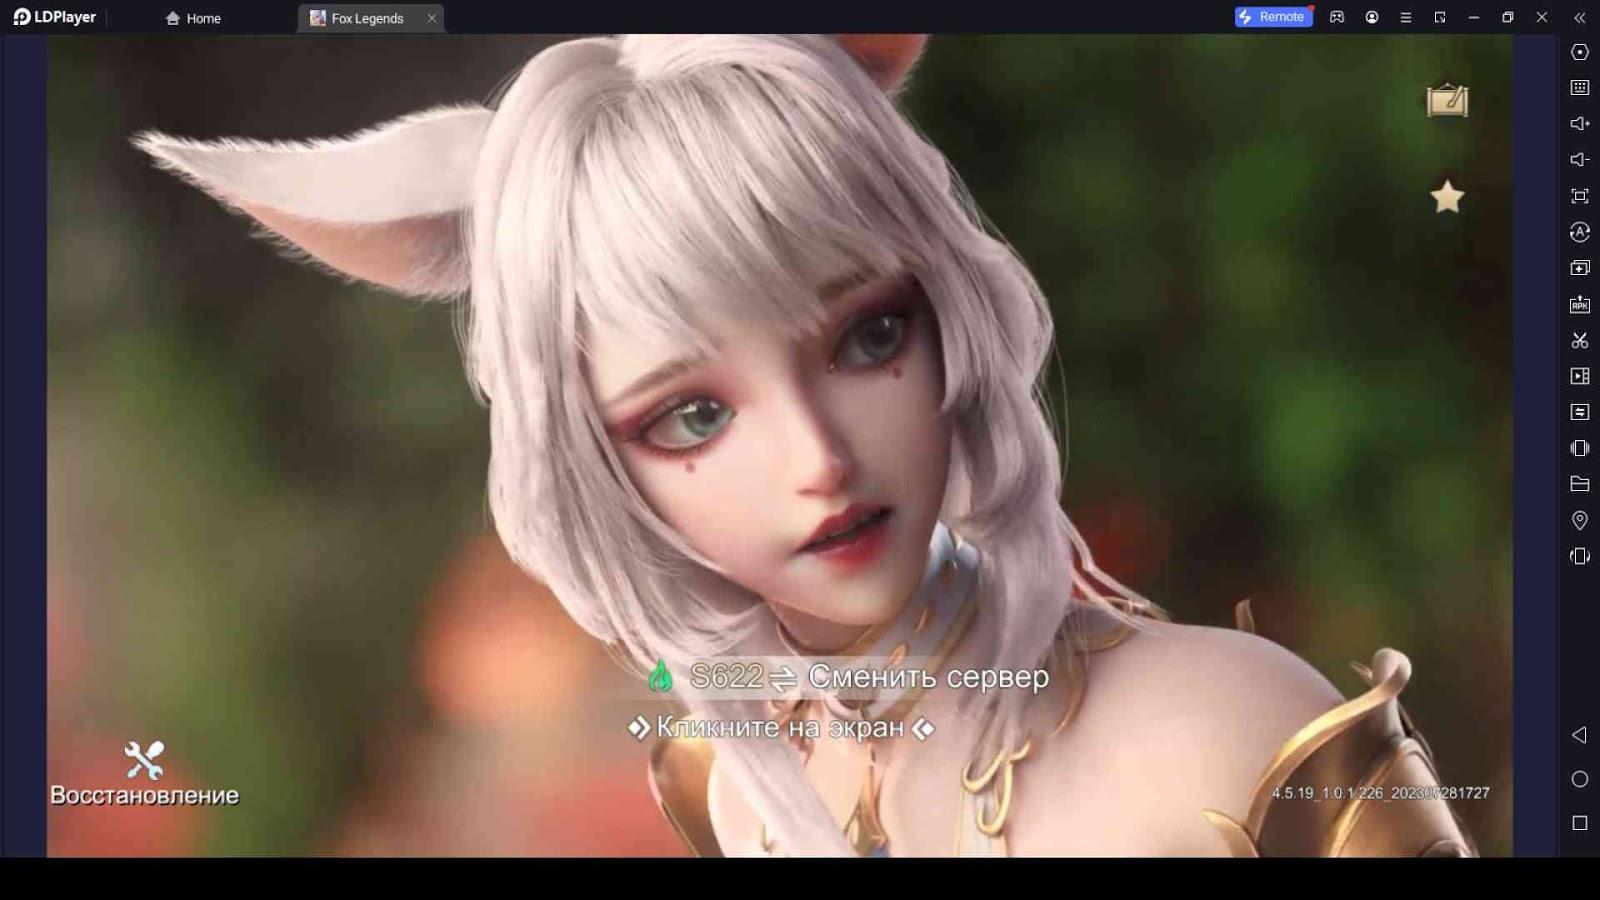 MMORPG Adventure Fox Legends Beginner's Guide with Tips-Game Guides-LDPlayer